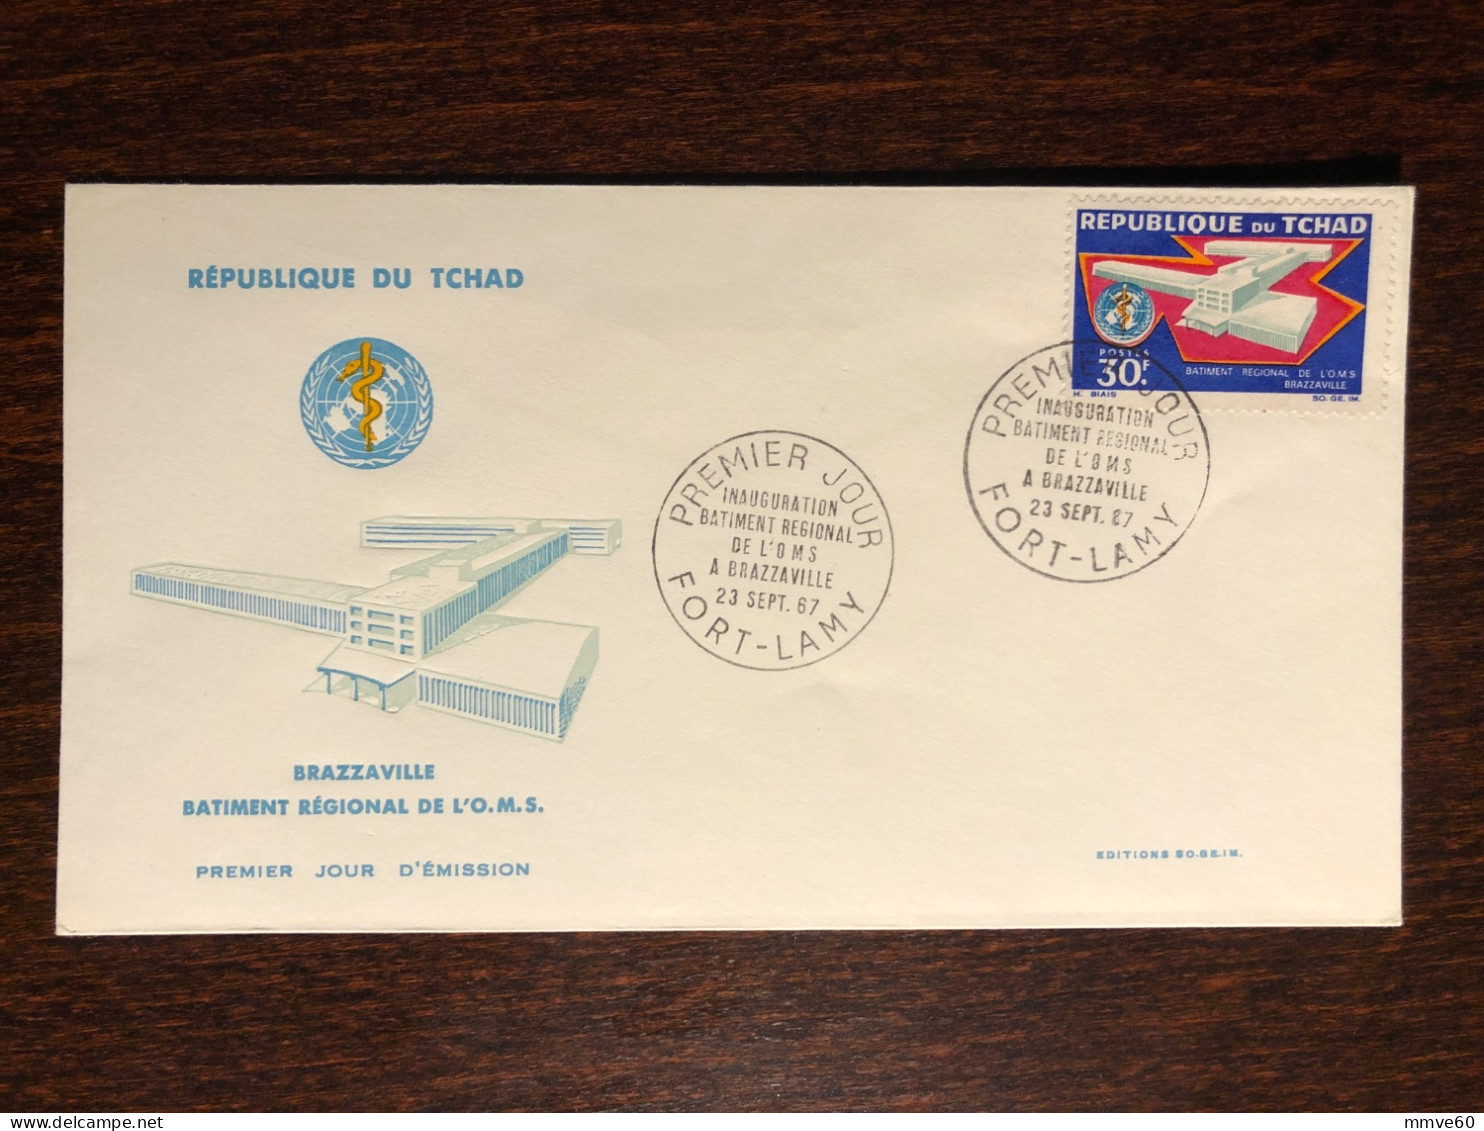 CHAD TCHAD FDC COVER 1967 YEAR WHO OMS HOSPITAL HEALTH MEDICINE STAMPS - Chad (1960-...)